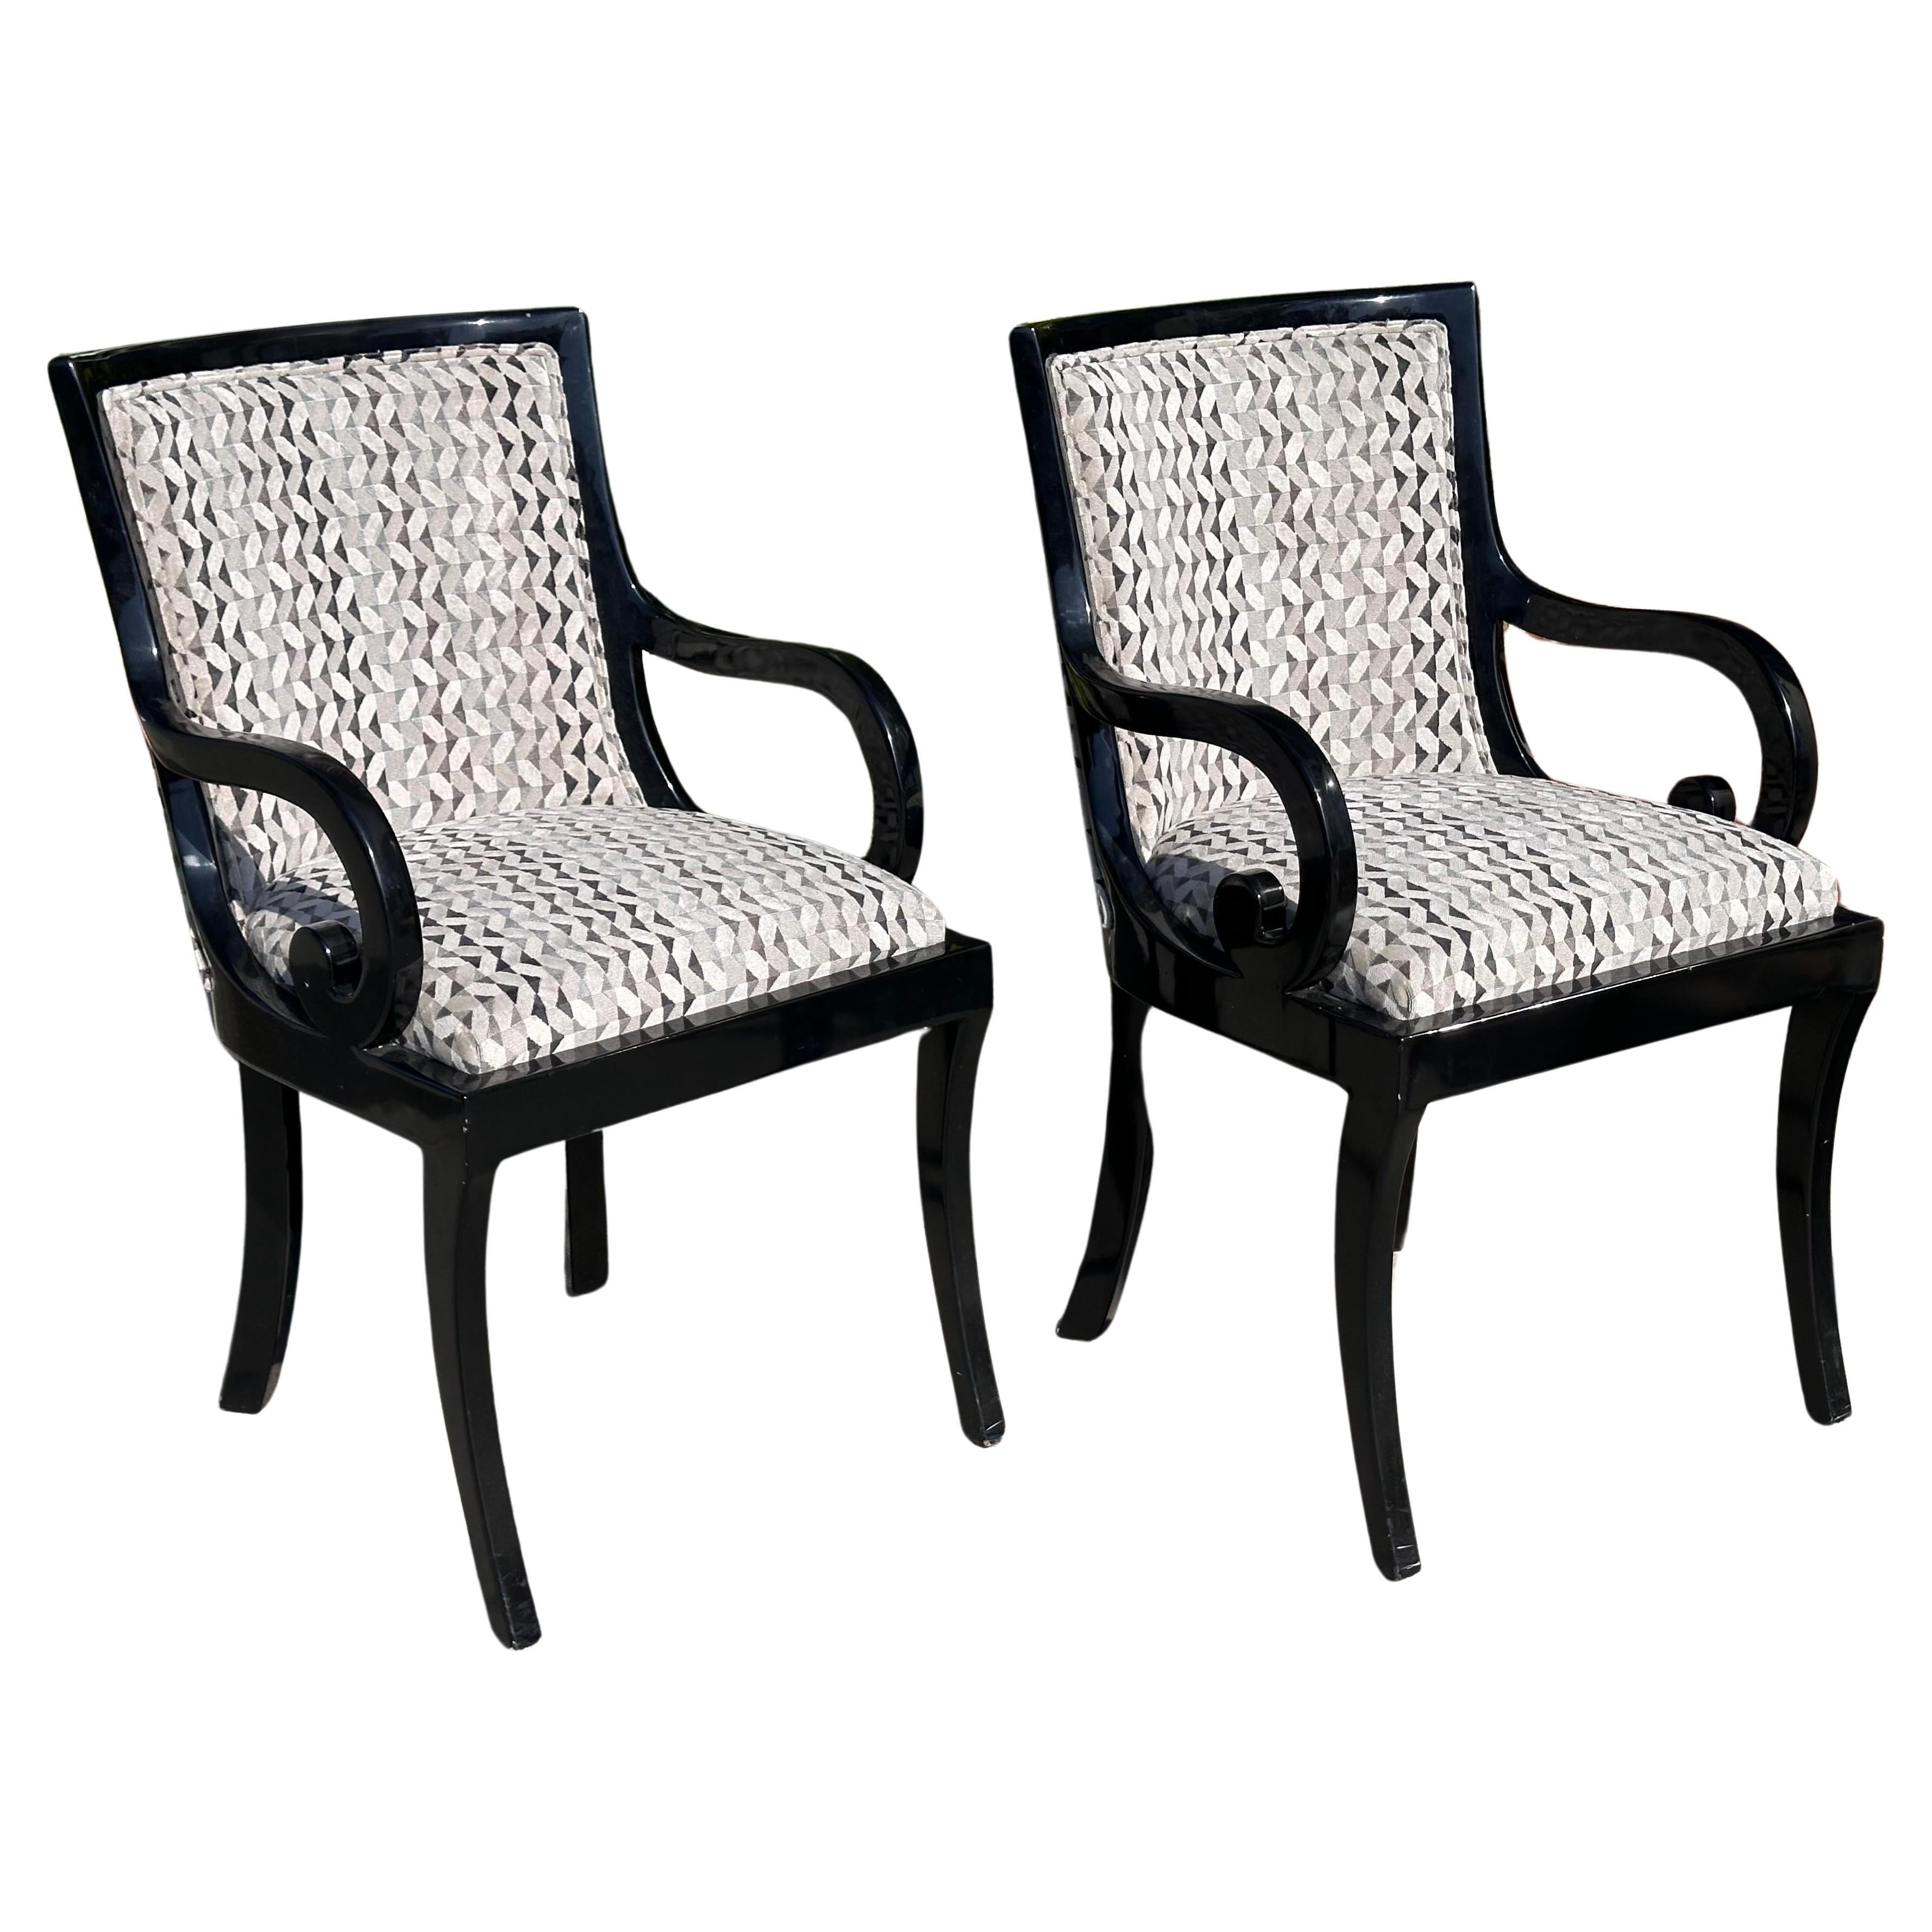 Pair of Donghia Black Lacquered Designer Arm Chairs